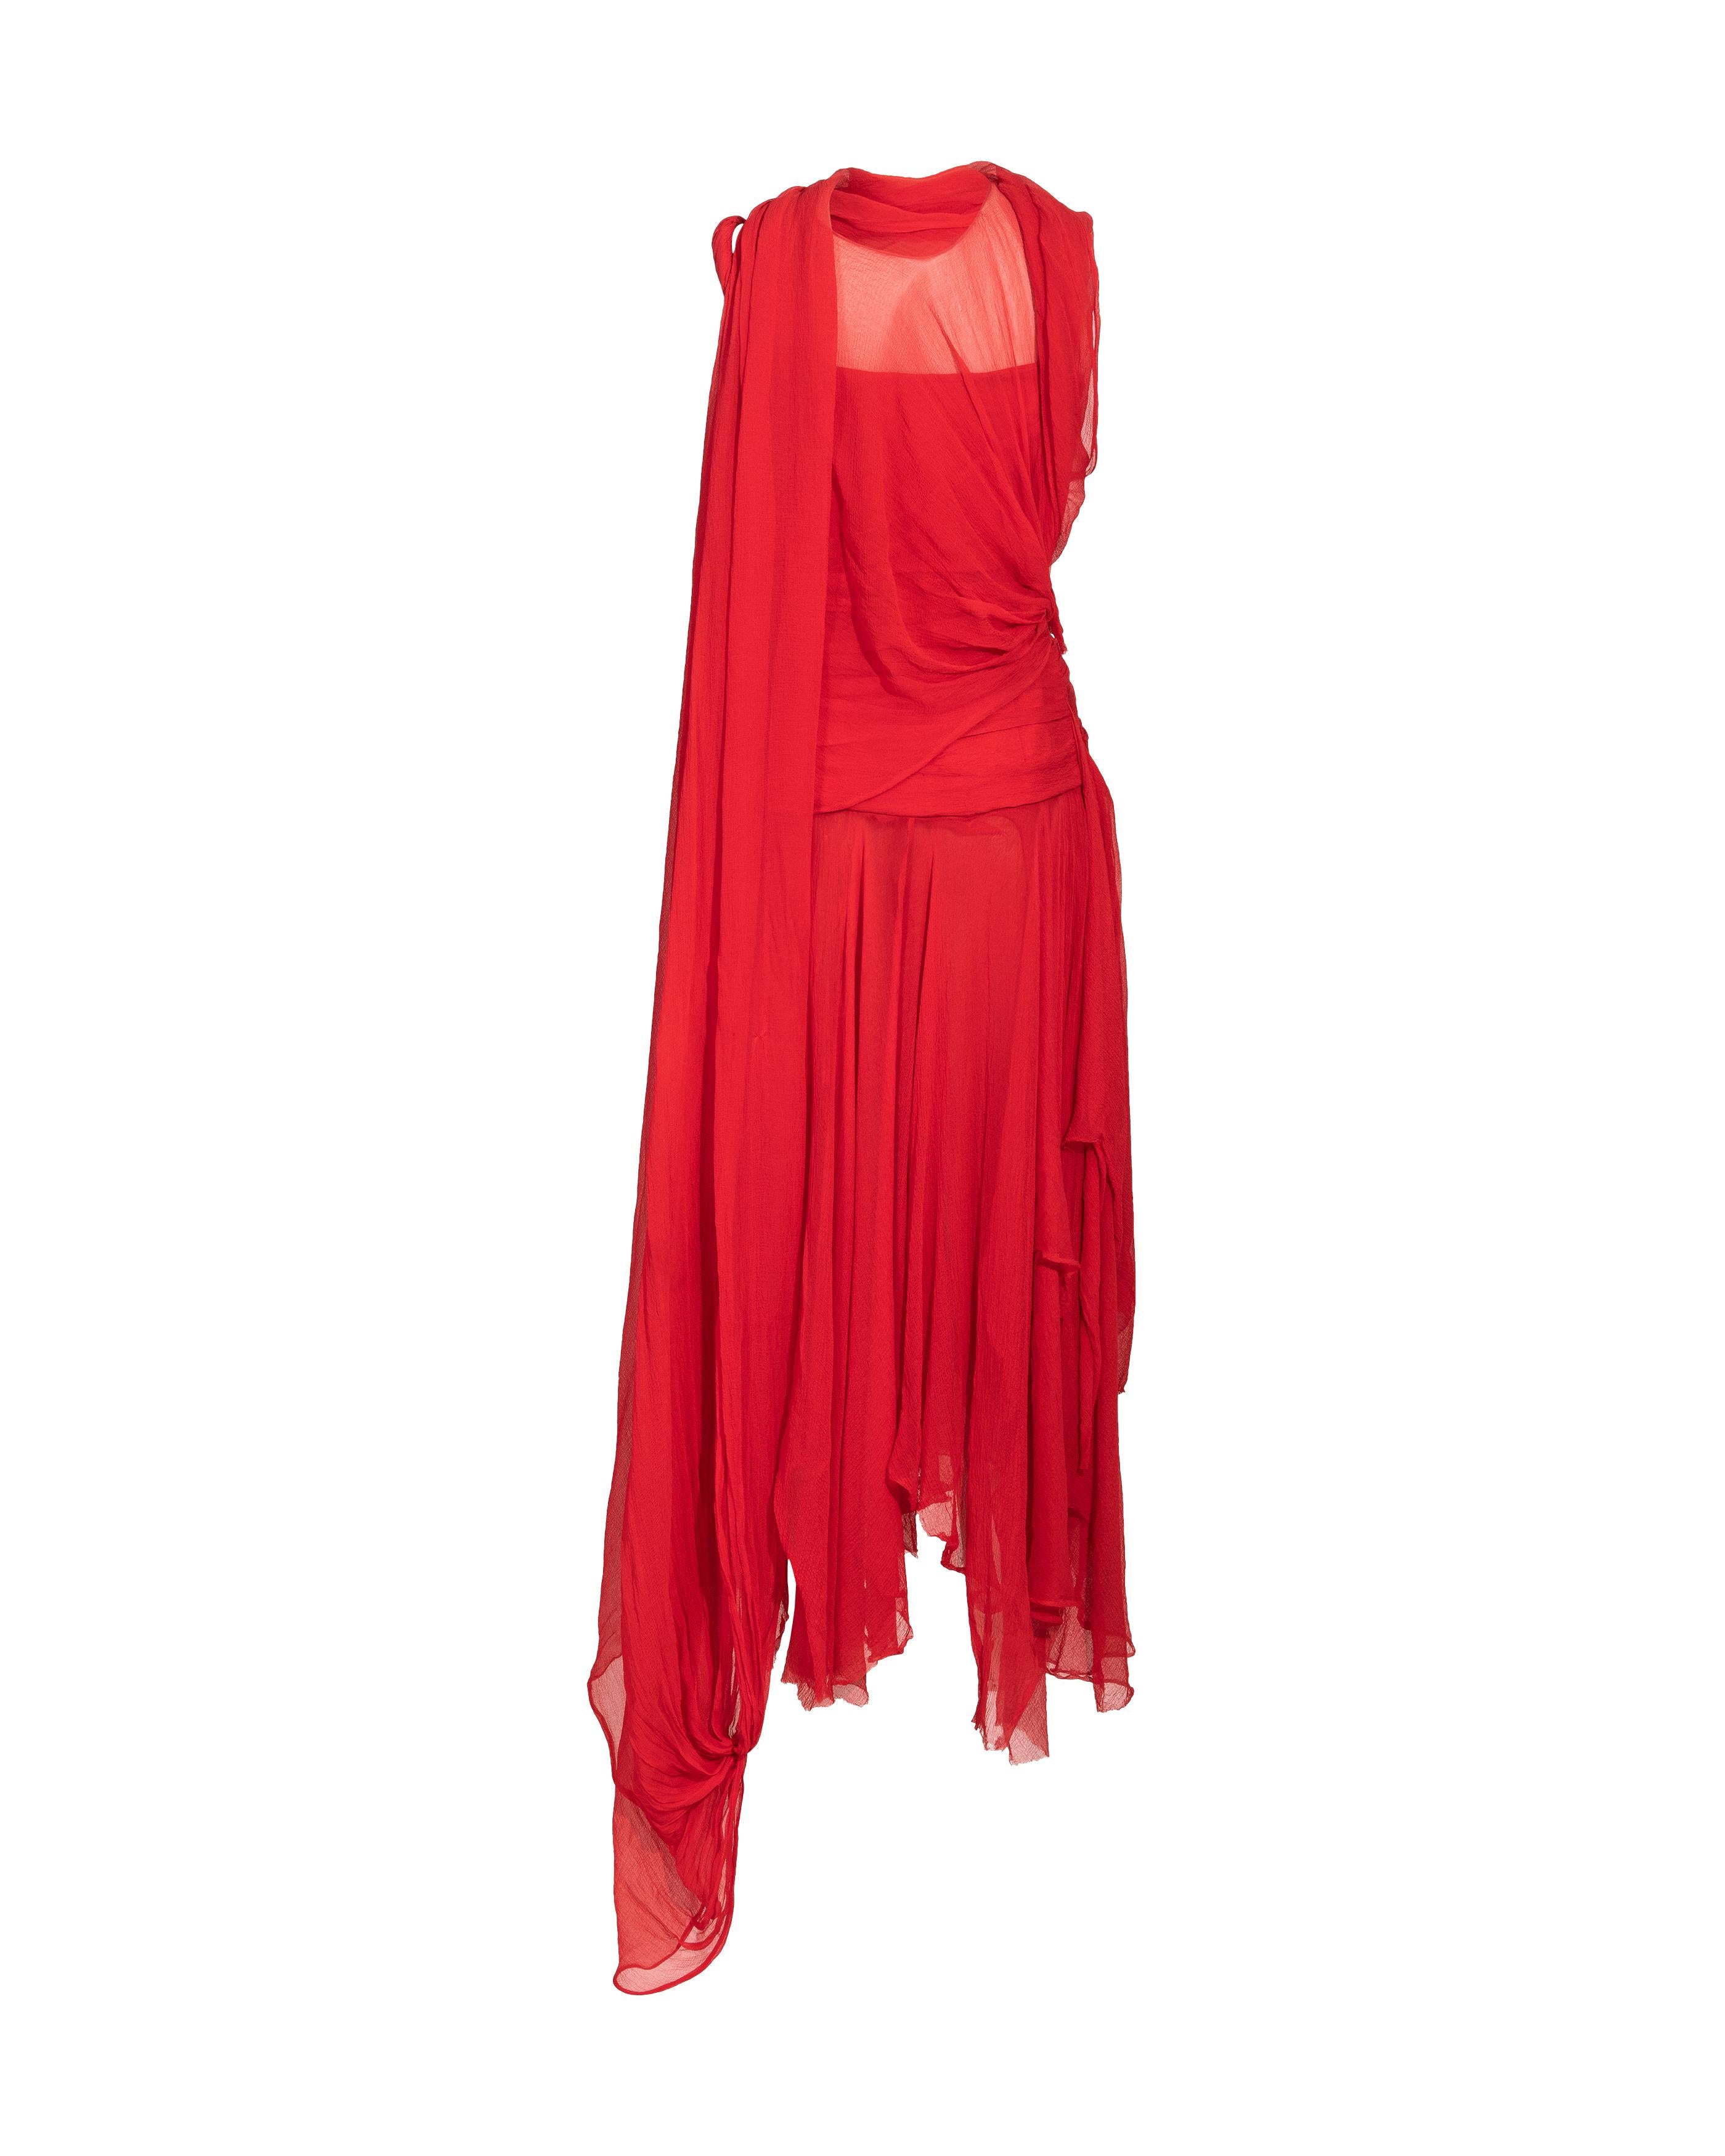 S/S 2003 Alexander McQueen  'Irere' Collection Red Silk Chiffon Gown with Sash For Sale 9